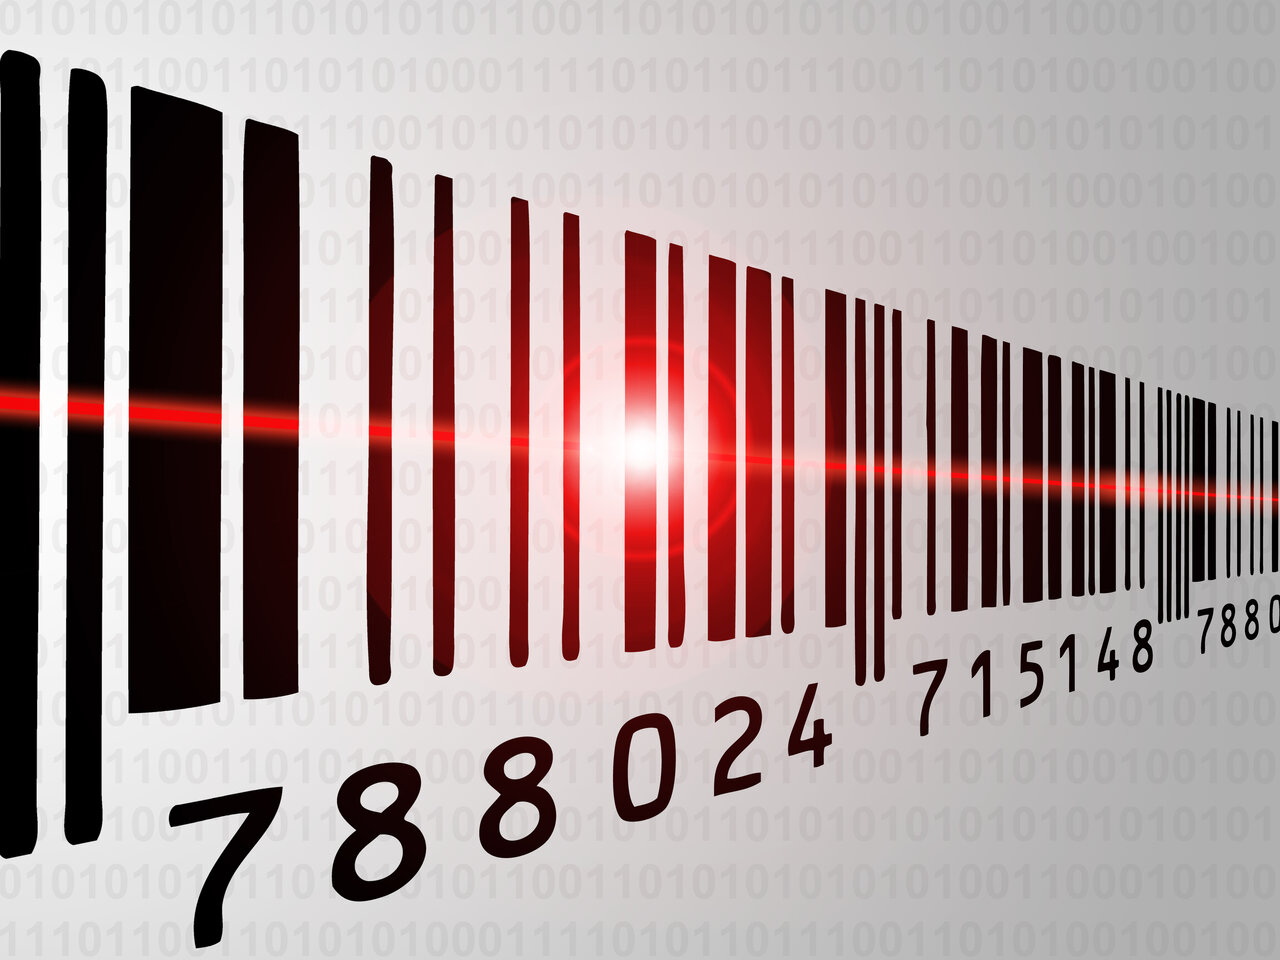 How to Improve Barcode Readability